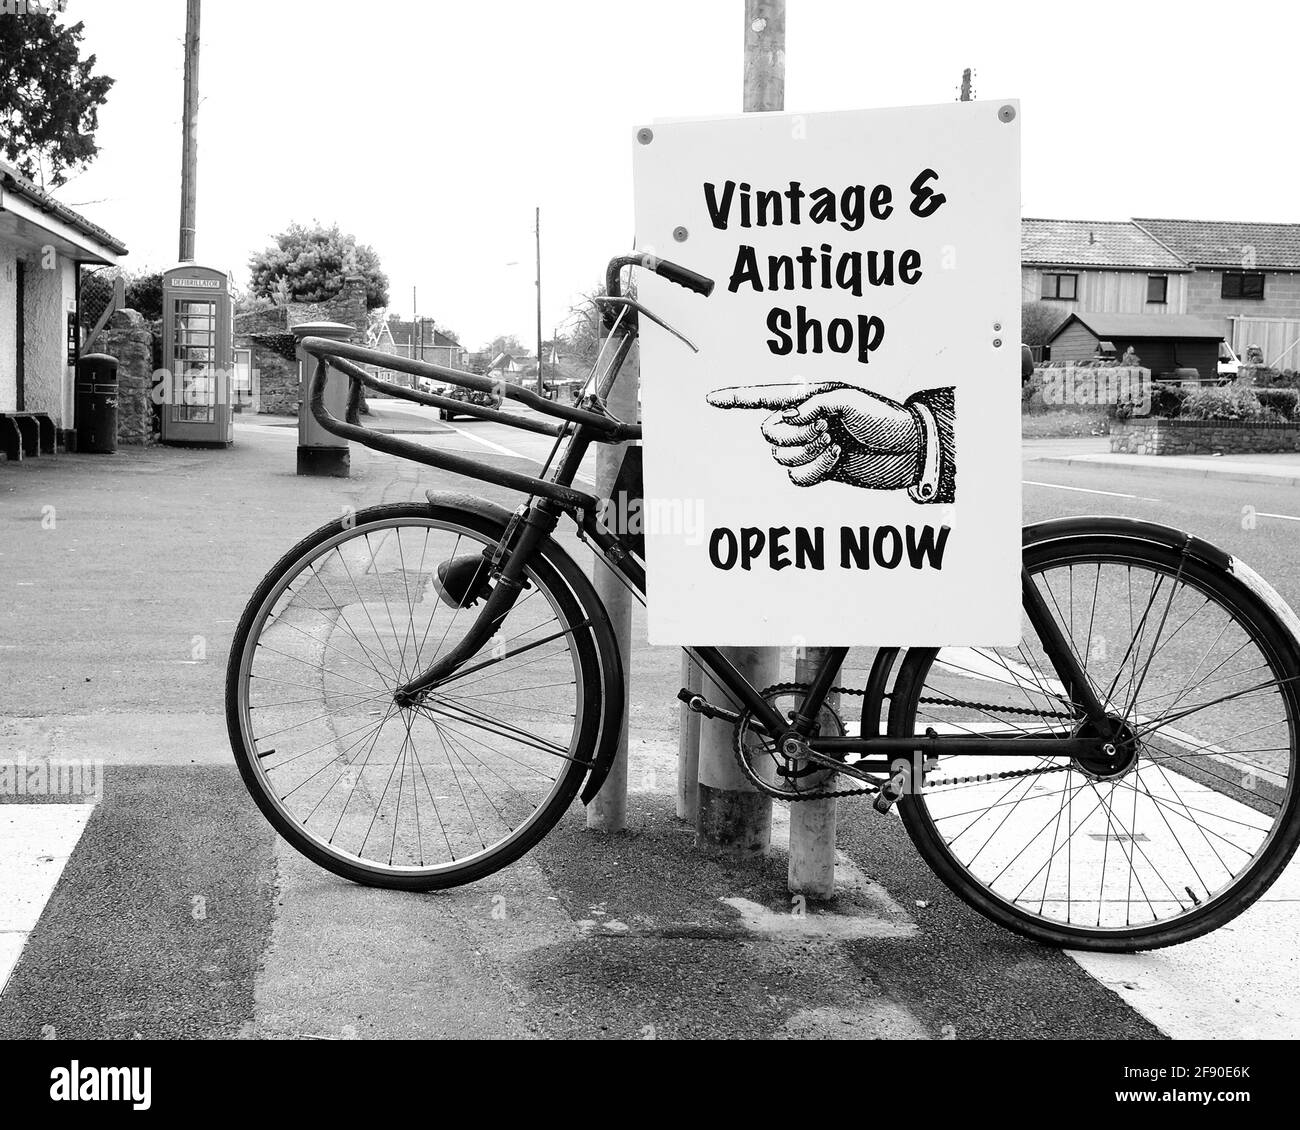 April 2021 - An old Pashley butchers bike used to advertise a Vintage & Antique shop in the Somerset village of Cheddar. Stock Photo